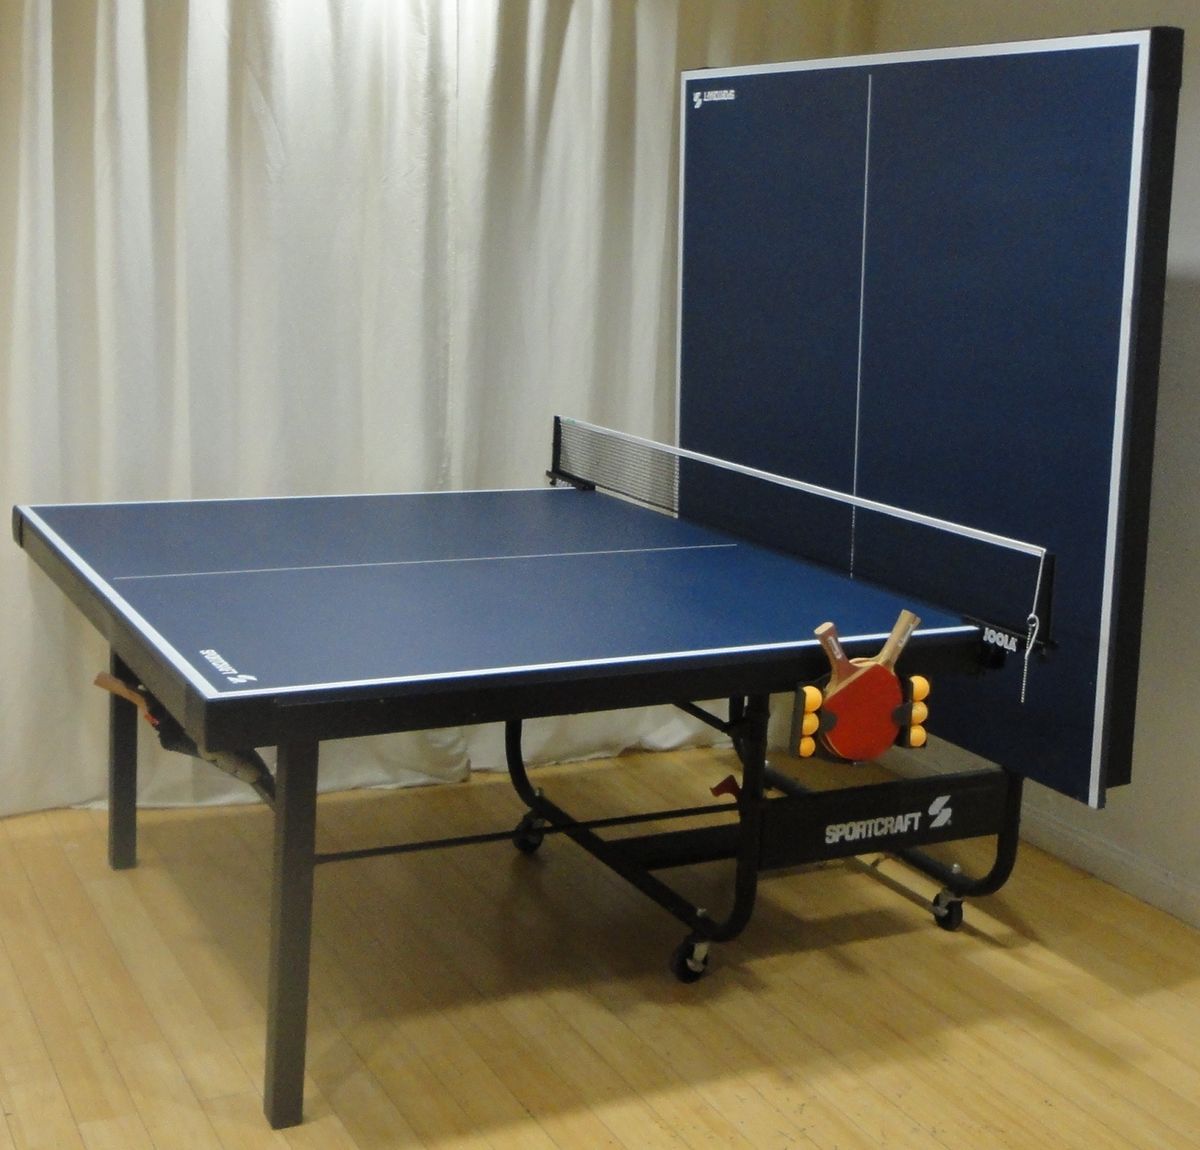 Sportcraft Heavy Duty Ping Pong Table